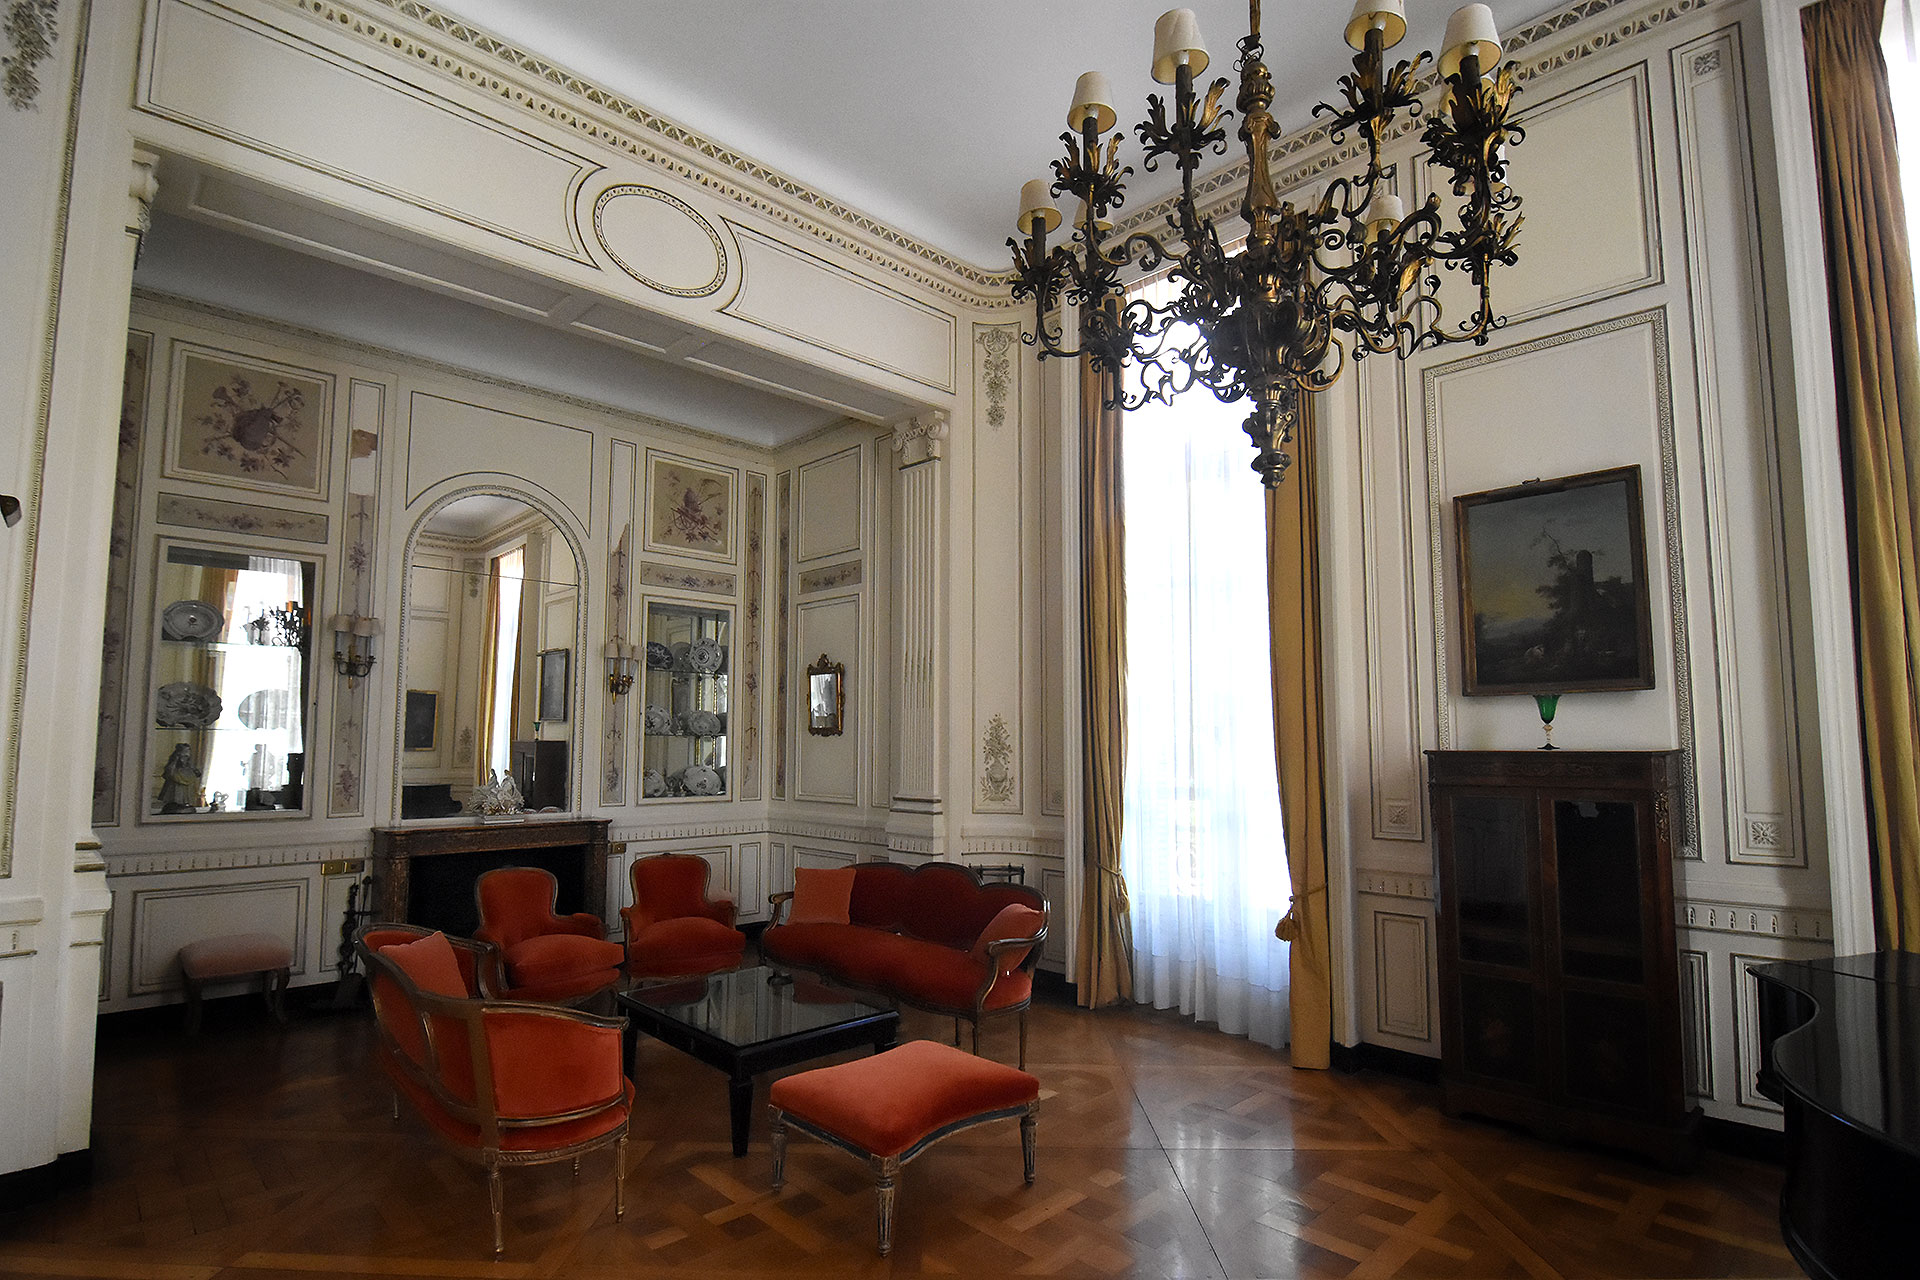 The music corner is one of the most beautiful in the residence and is located to the left of the entrance hall and the grand staircase (Nicolás Stulberg)